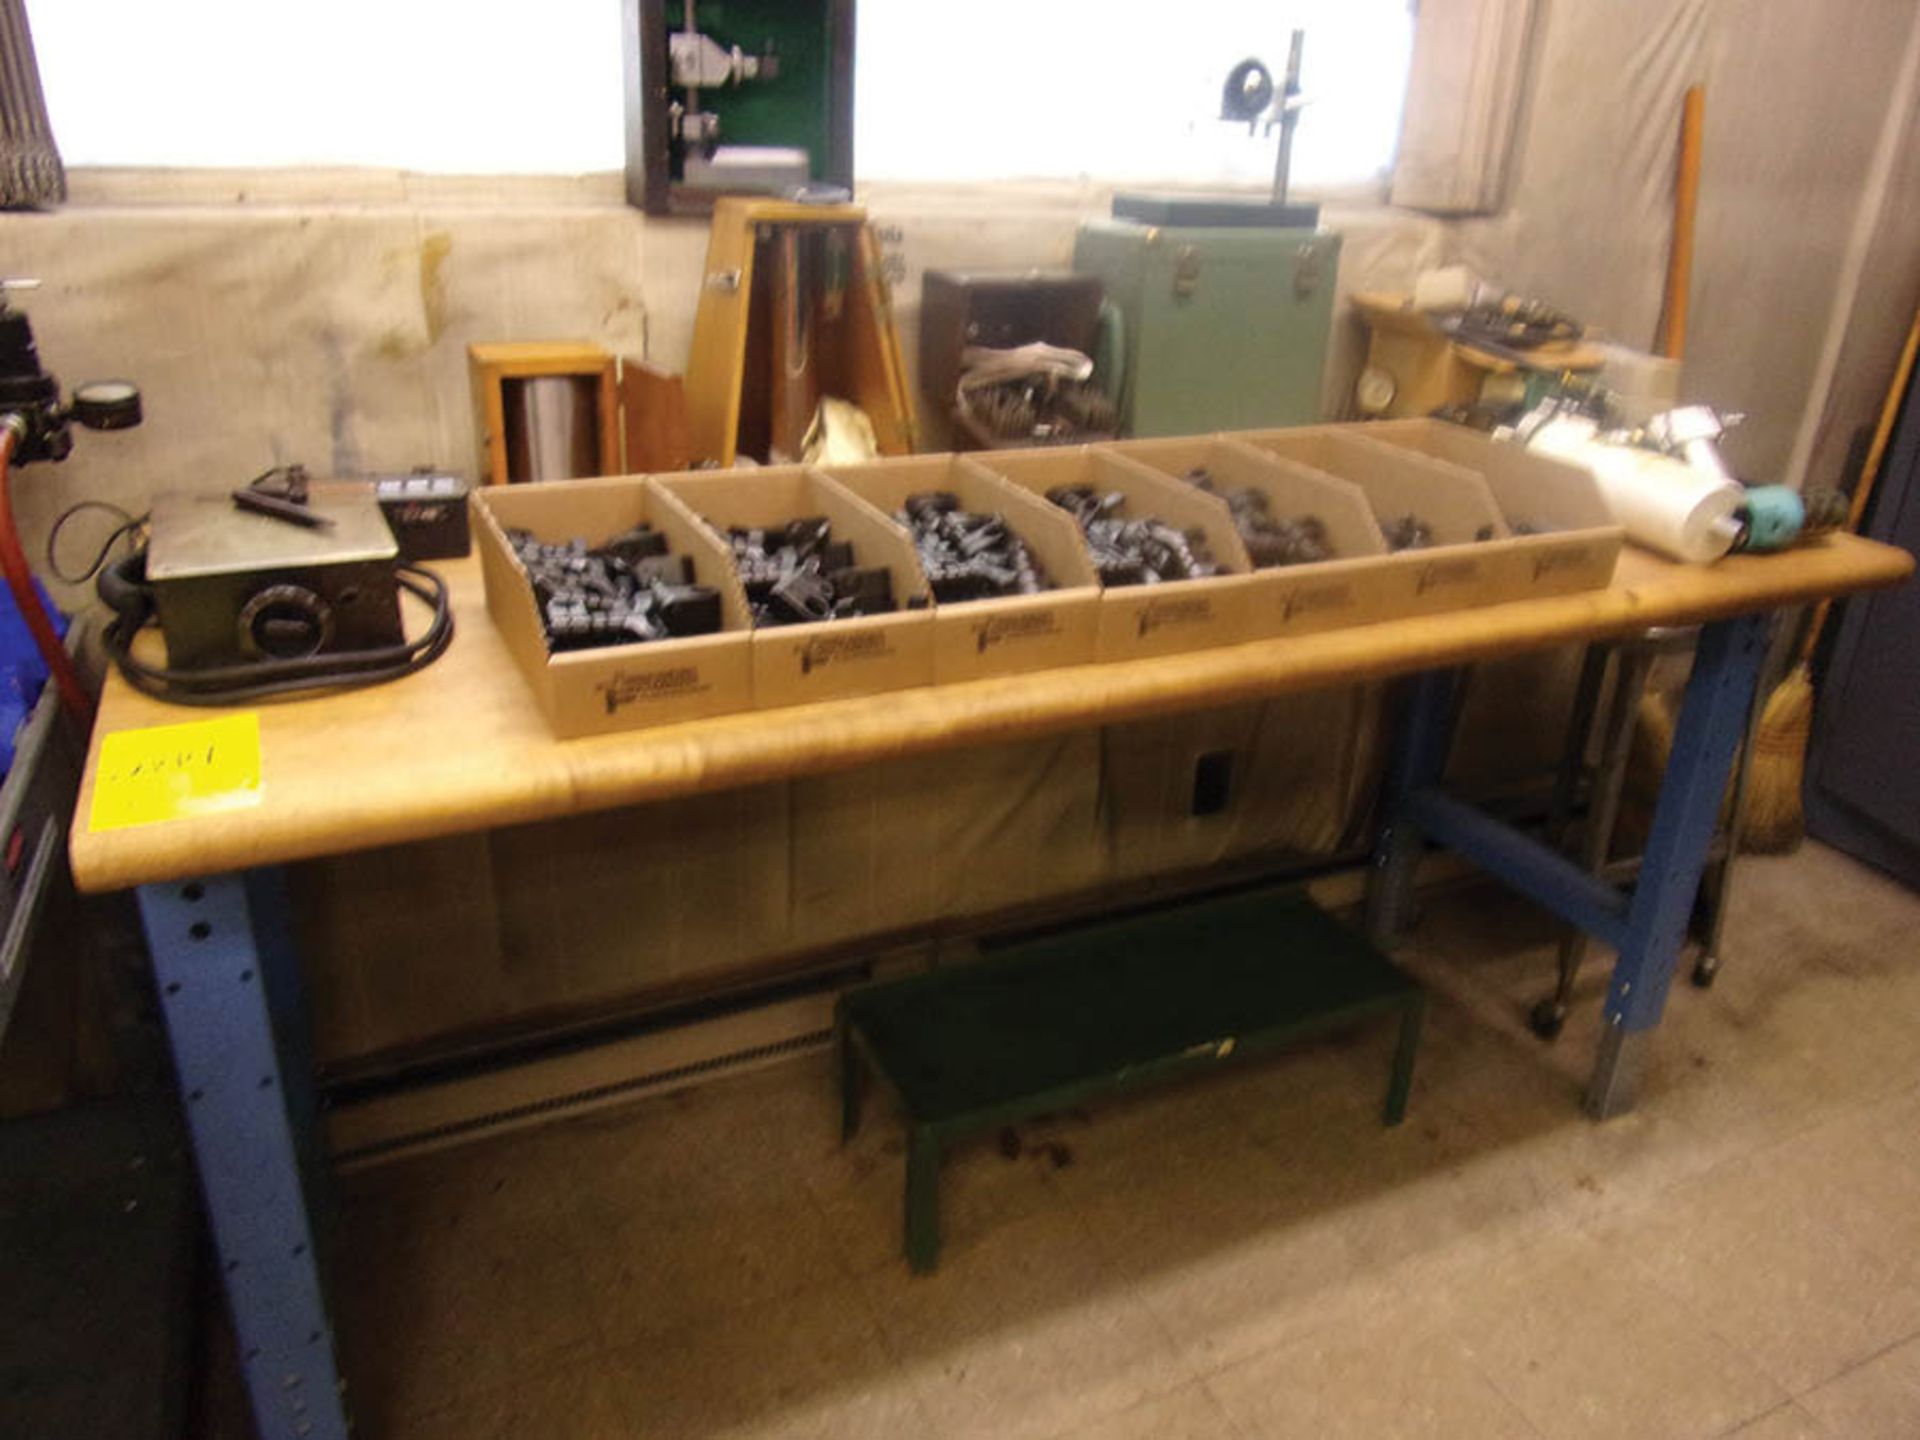 WORKBENCH AND CONTENTS; INDICATOR STAND PARTS, STAKING SET, ROUGHNESS SAMPLES - Image 3 of 3